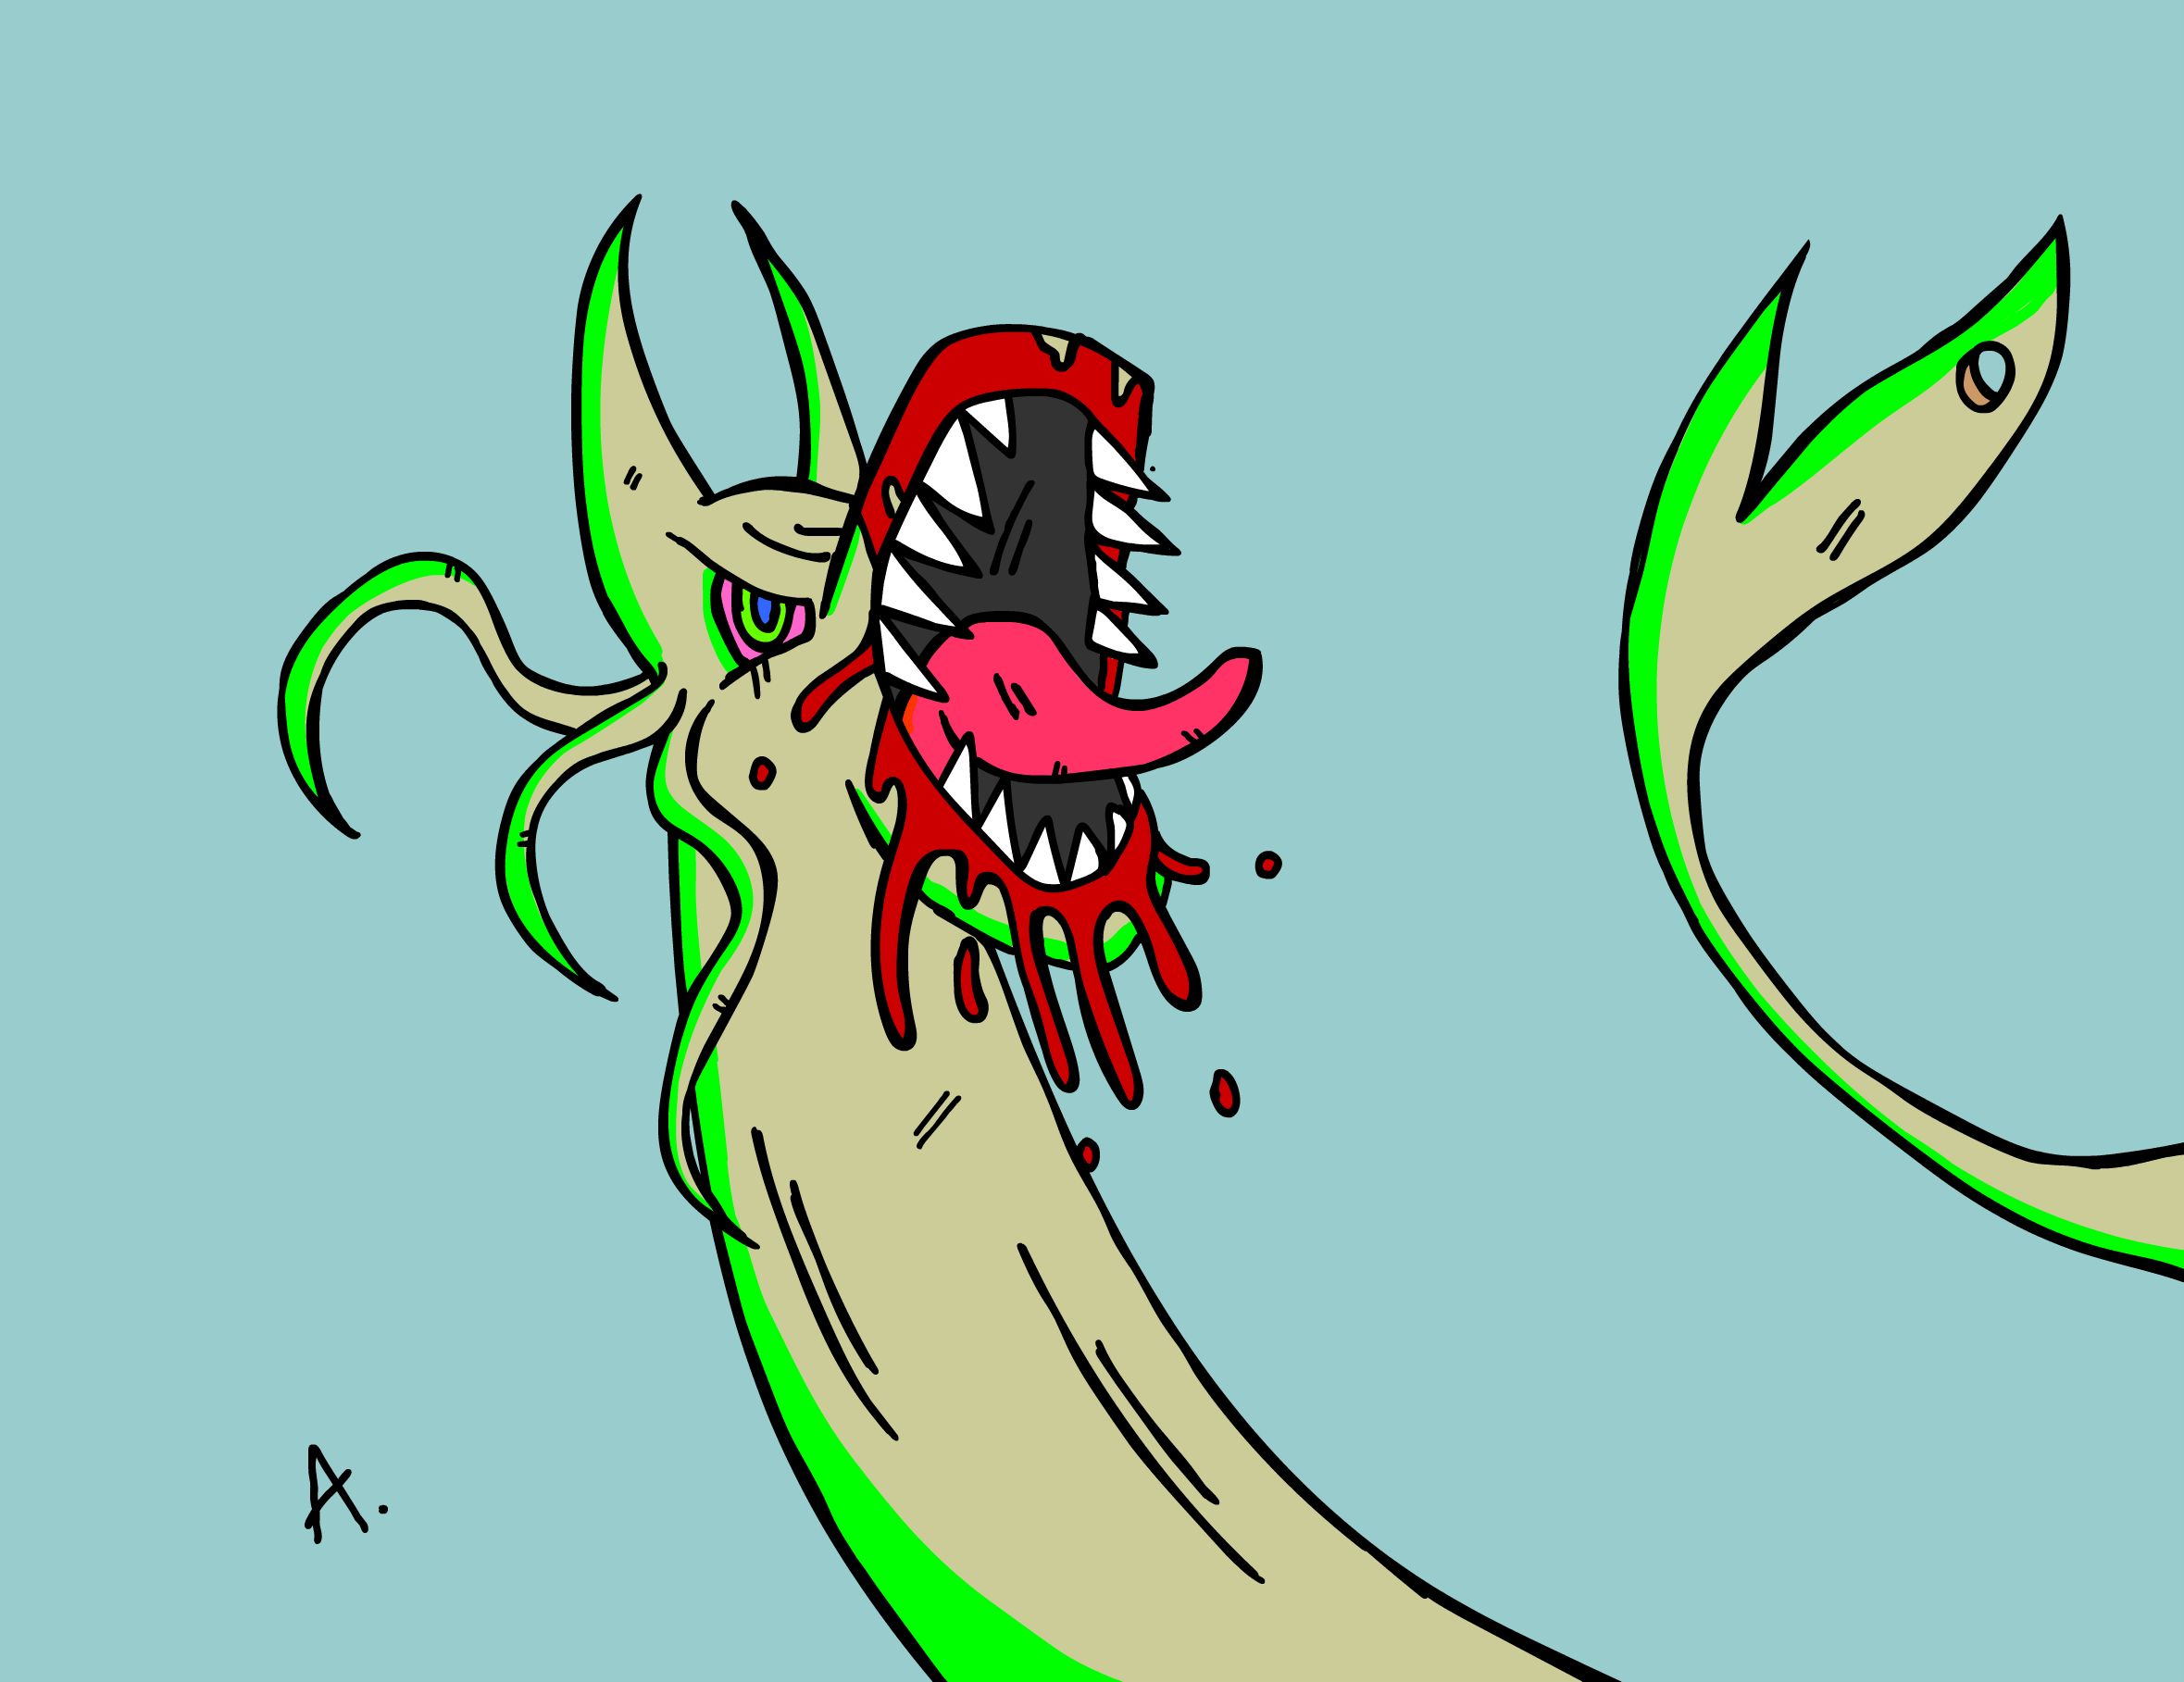 Giant snake monster with blood in its mouth